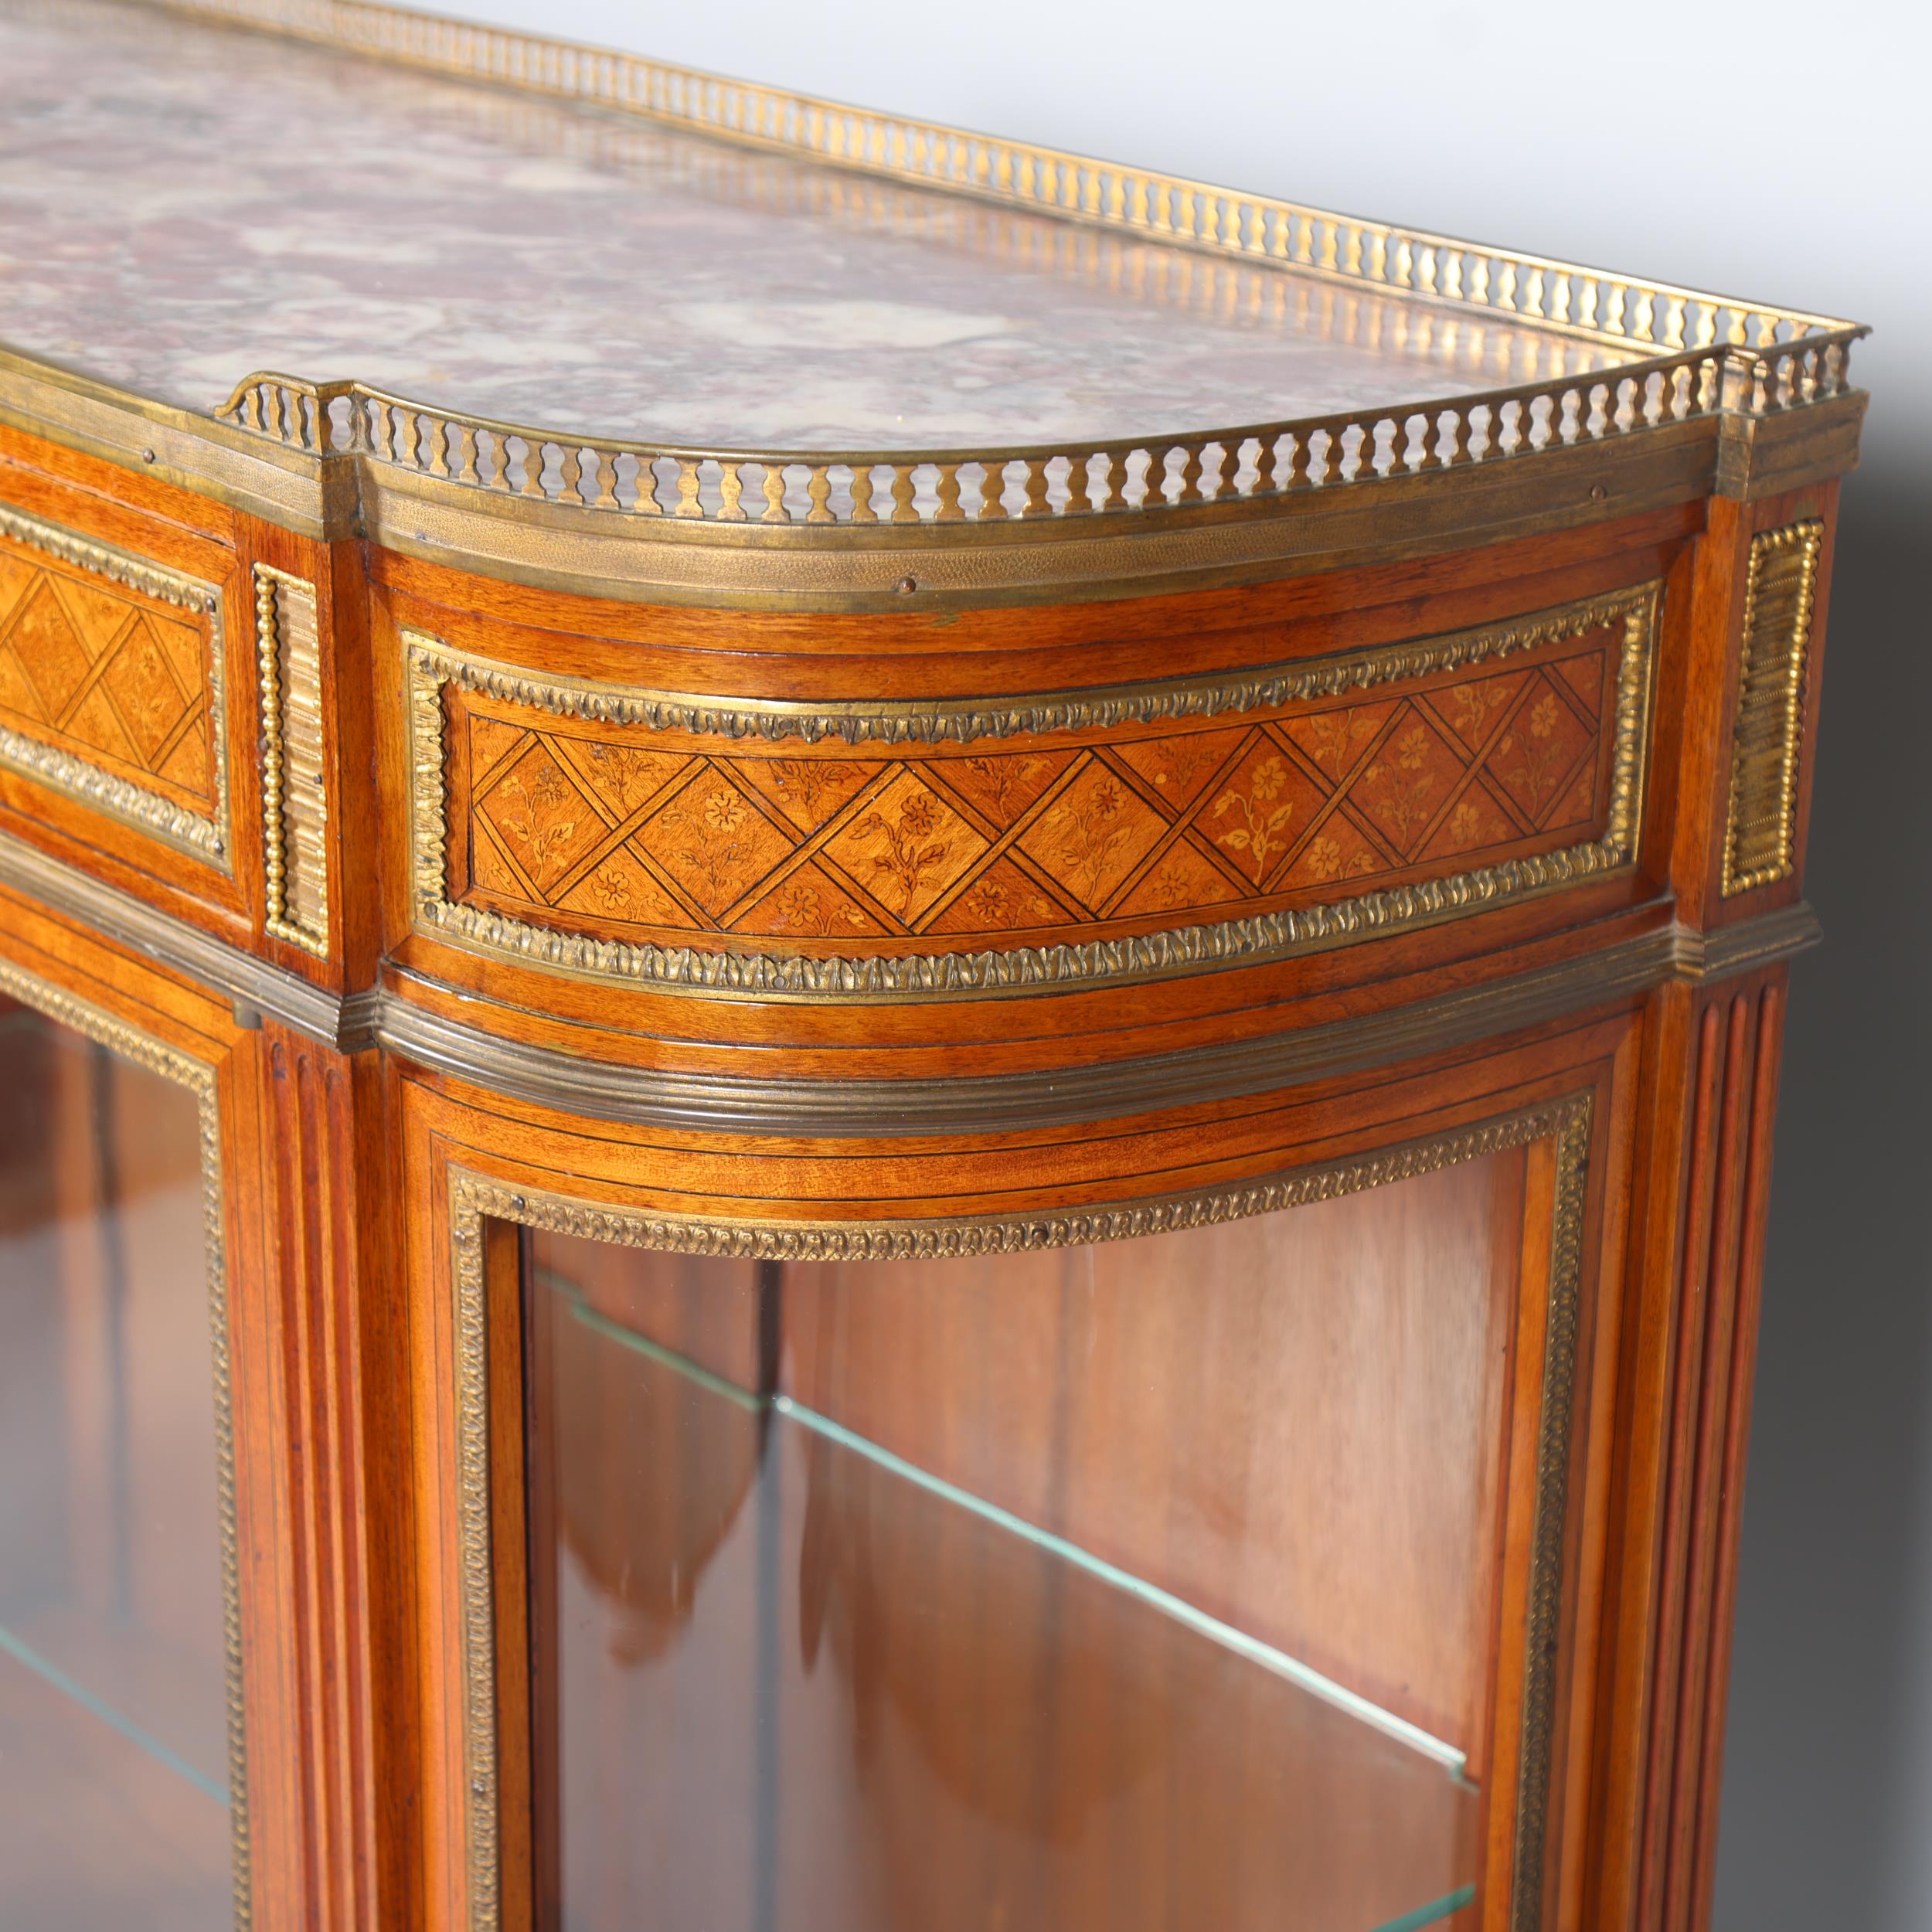 A fine quality French walnut and marquetry inlaid vitrine cabinet, circa 1900, the marble top having - Image 3 of 7